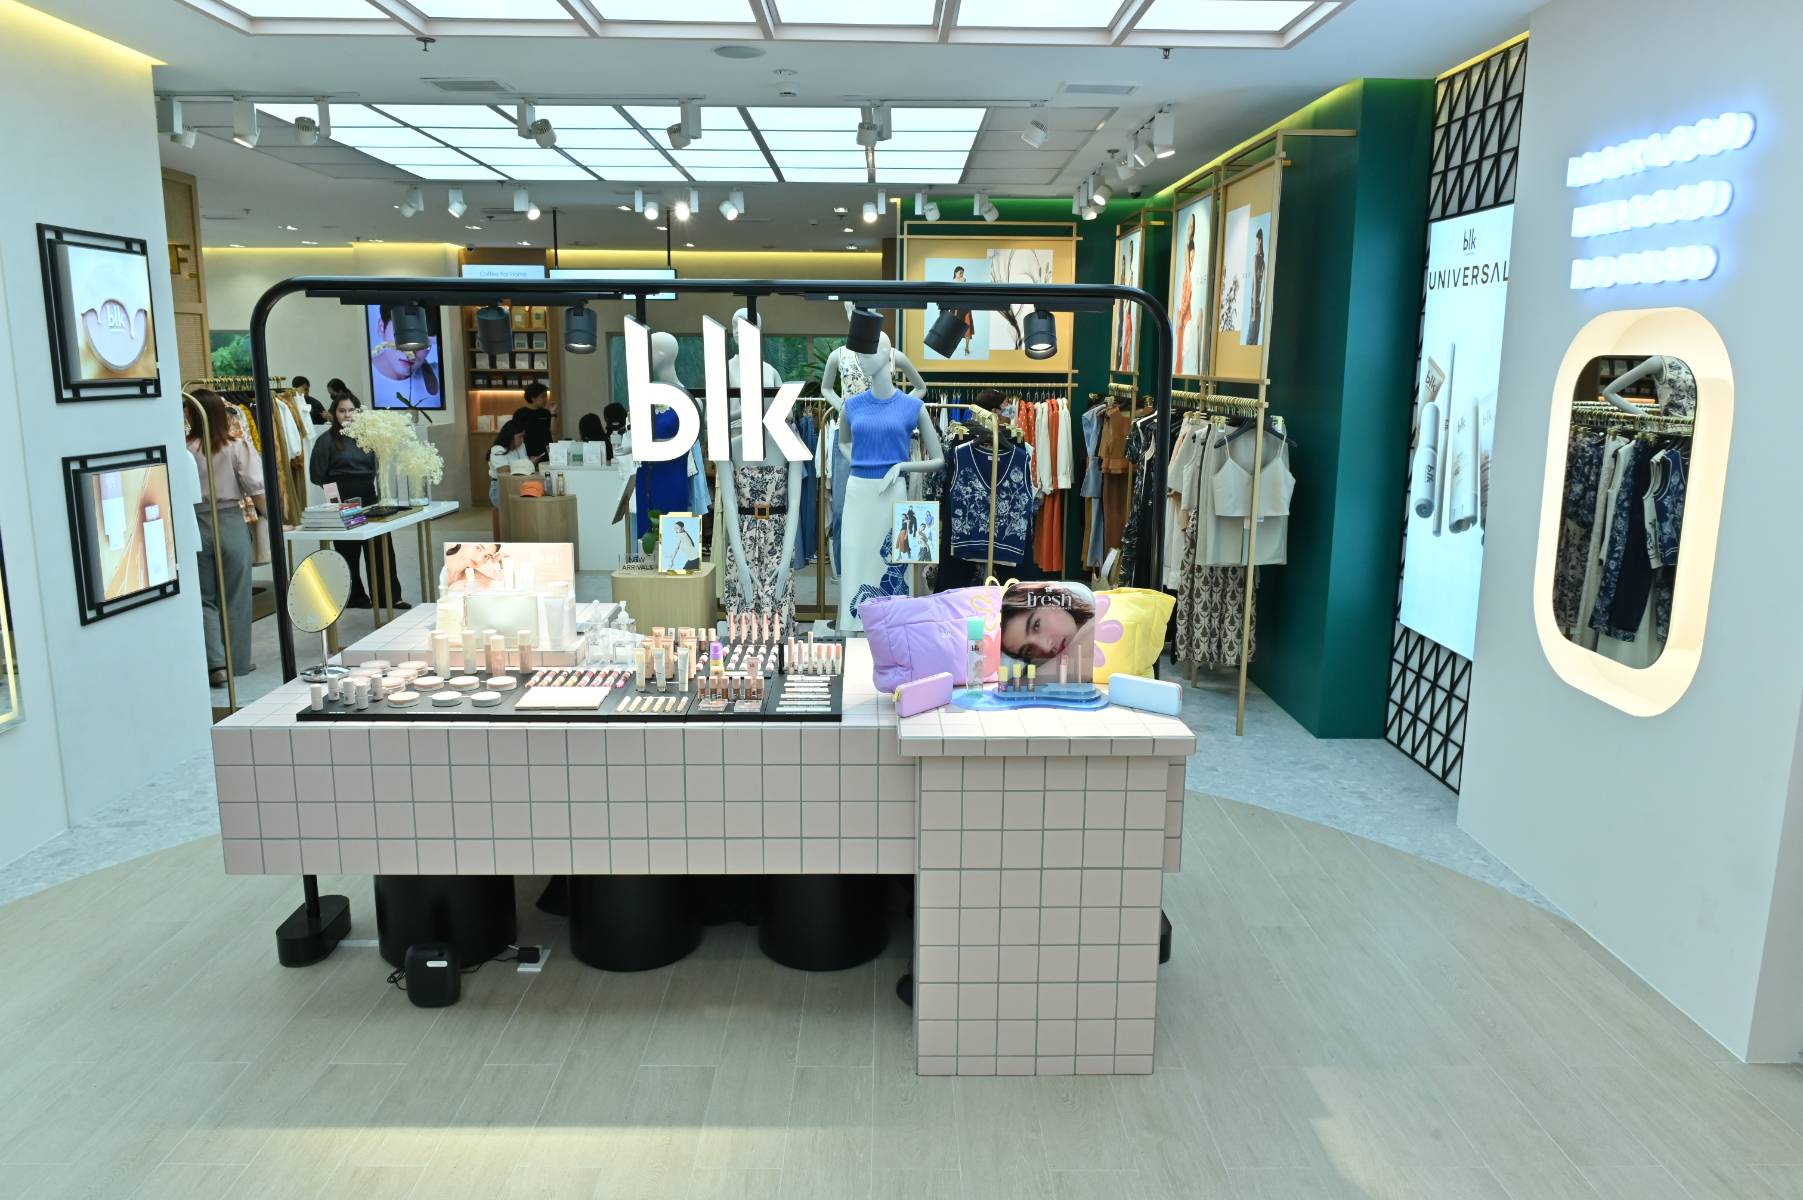 Blk Cosmetics at Maisonette in Power Plant Mall, Rockwell, Makati.